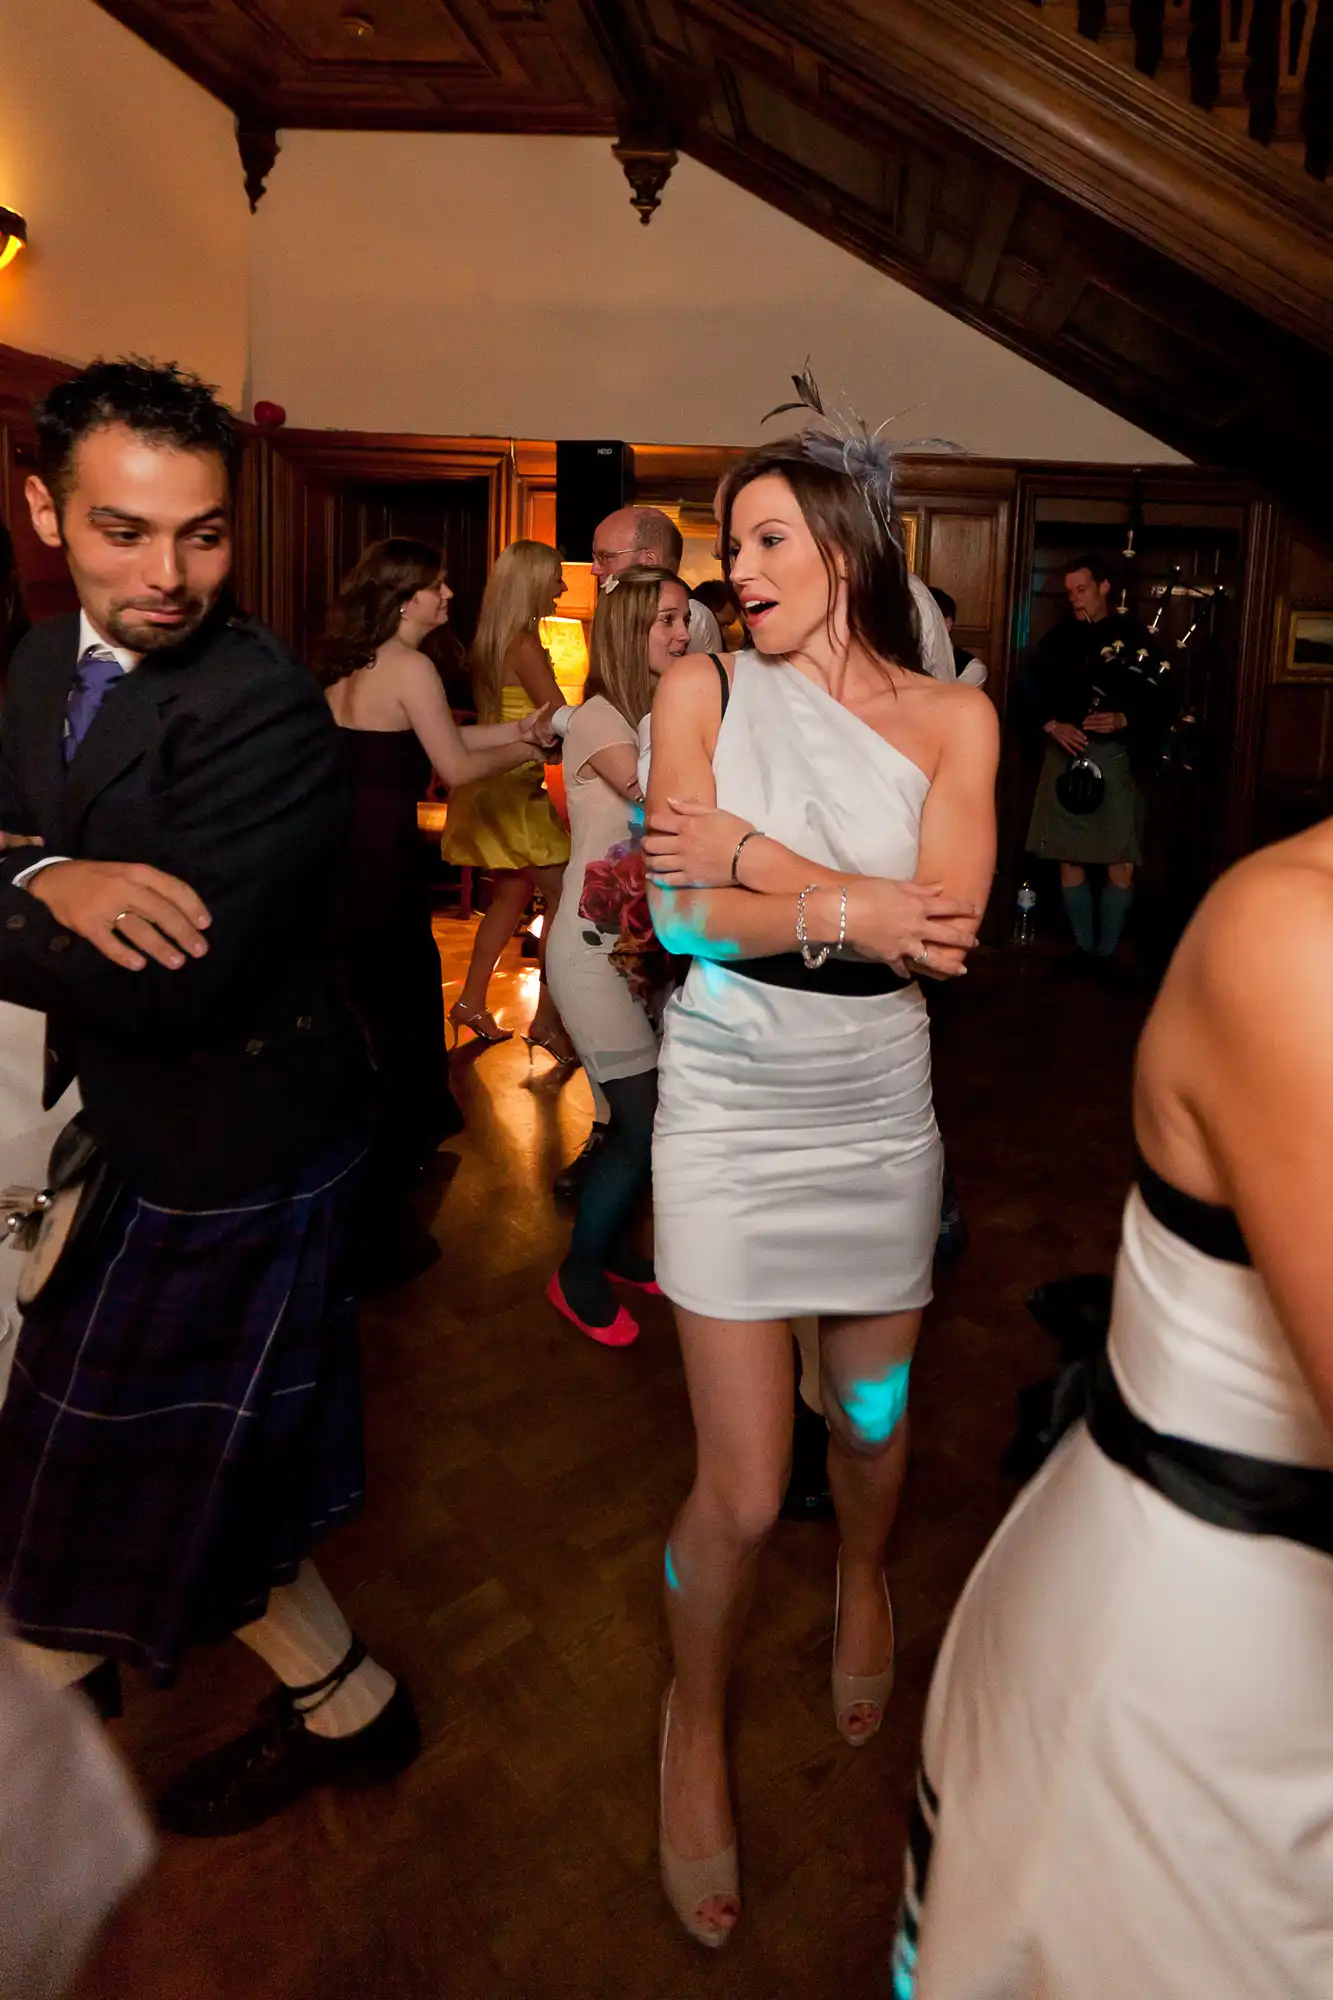 A woman in a white dress dancing at a party, surrounded by other guests, including a man in a kilt to her left.